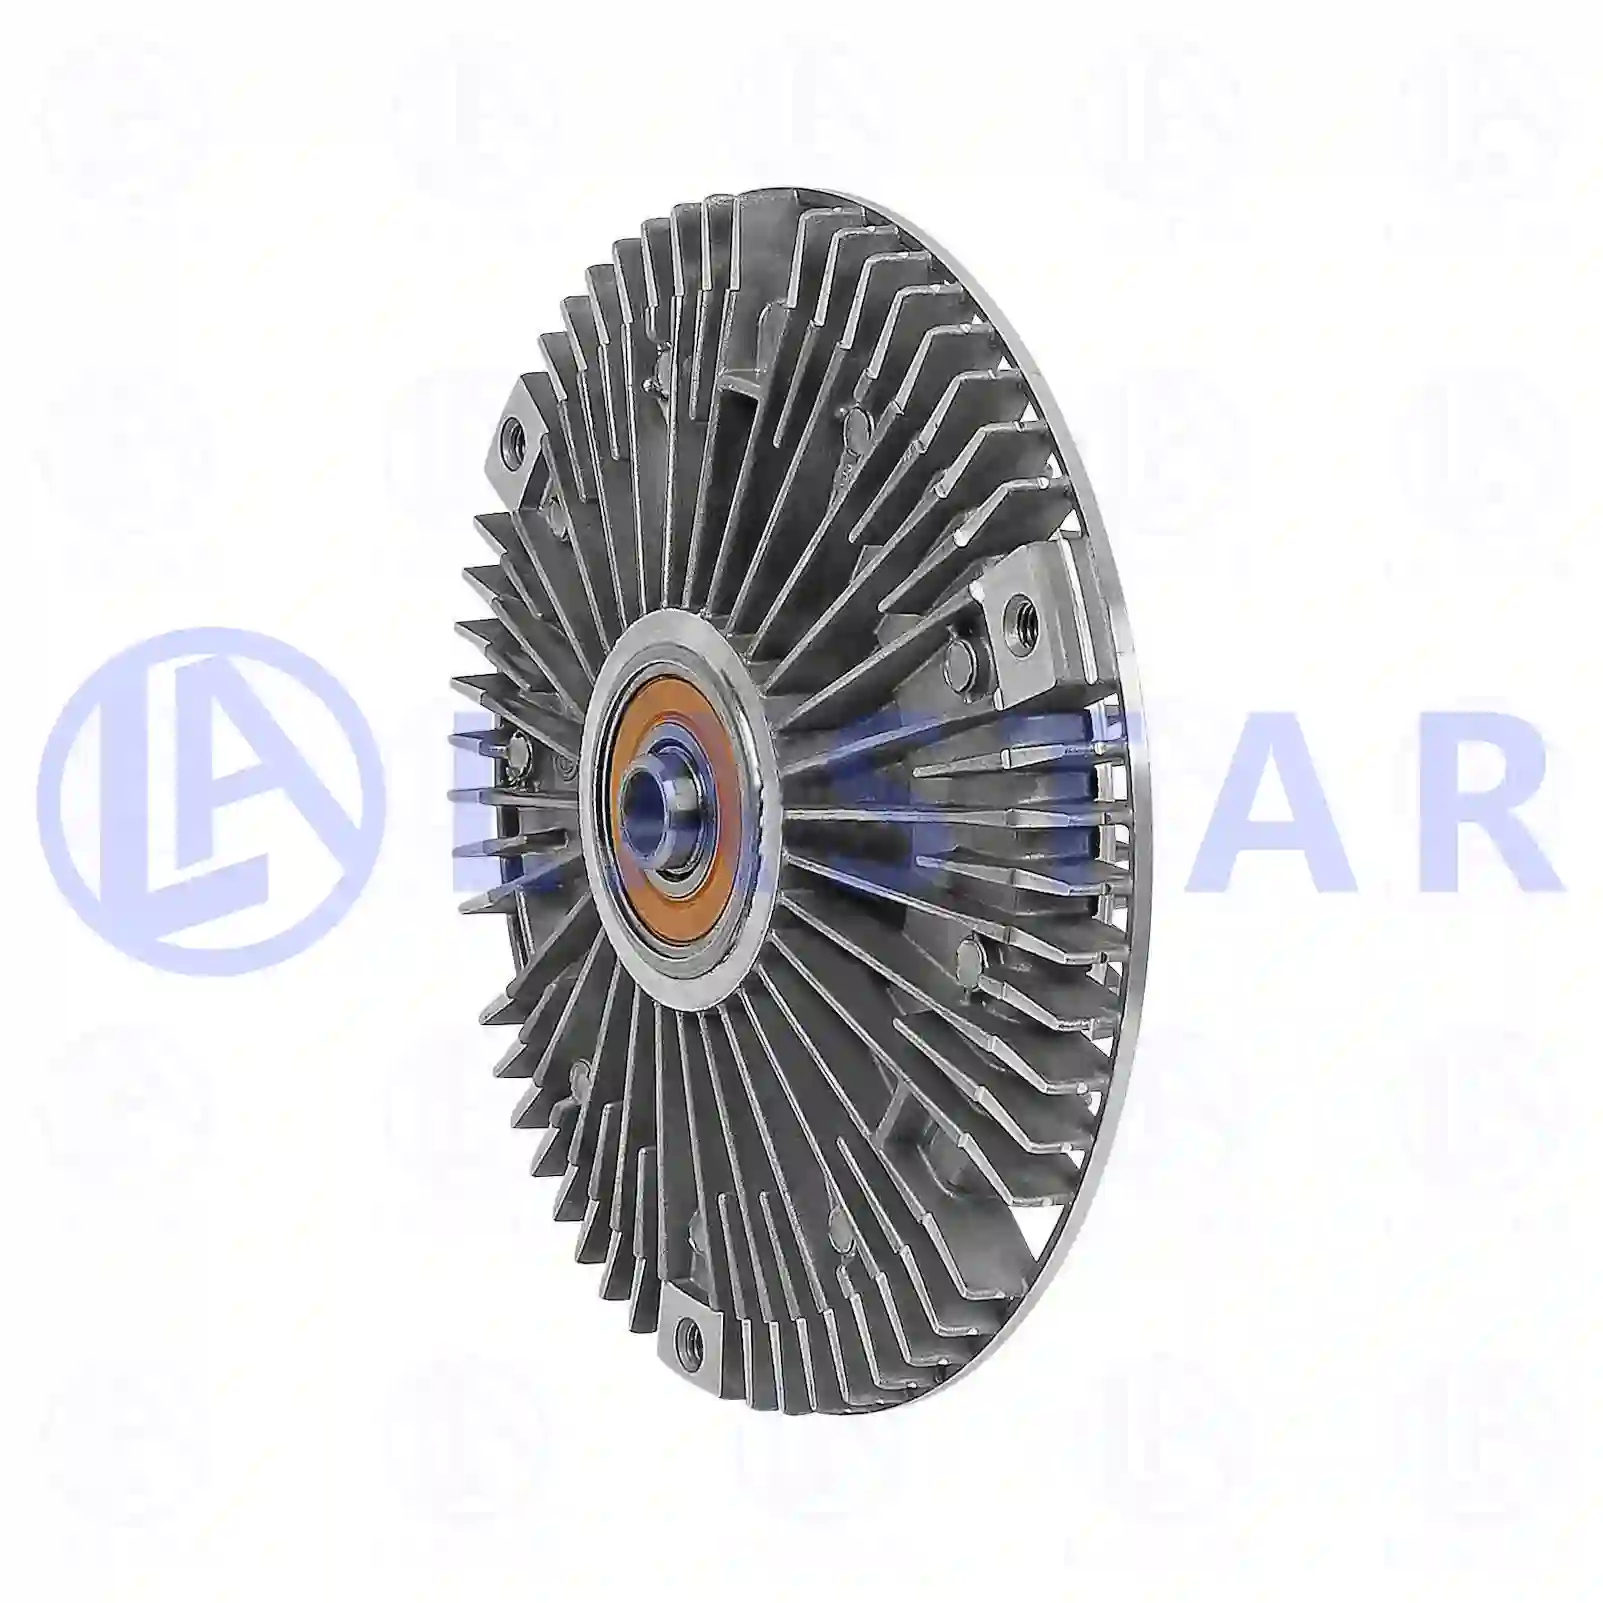 Fan clutch, 77708090, 2005122 ||  77708090 Lastar Spare Part | Truck Spare Parts, Auotomotive Spare Parts Fan clutch, 77708090, 2005122 ||  77708090 Lastar Spare Part | Truck Spare Parts, Auotomotive Spare Parts